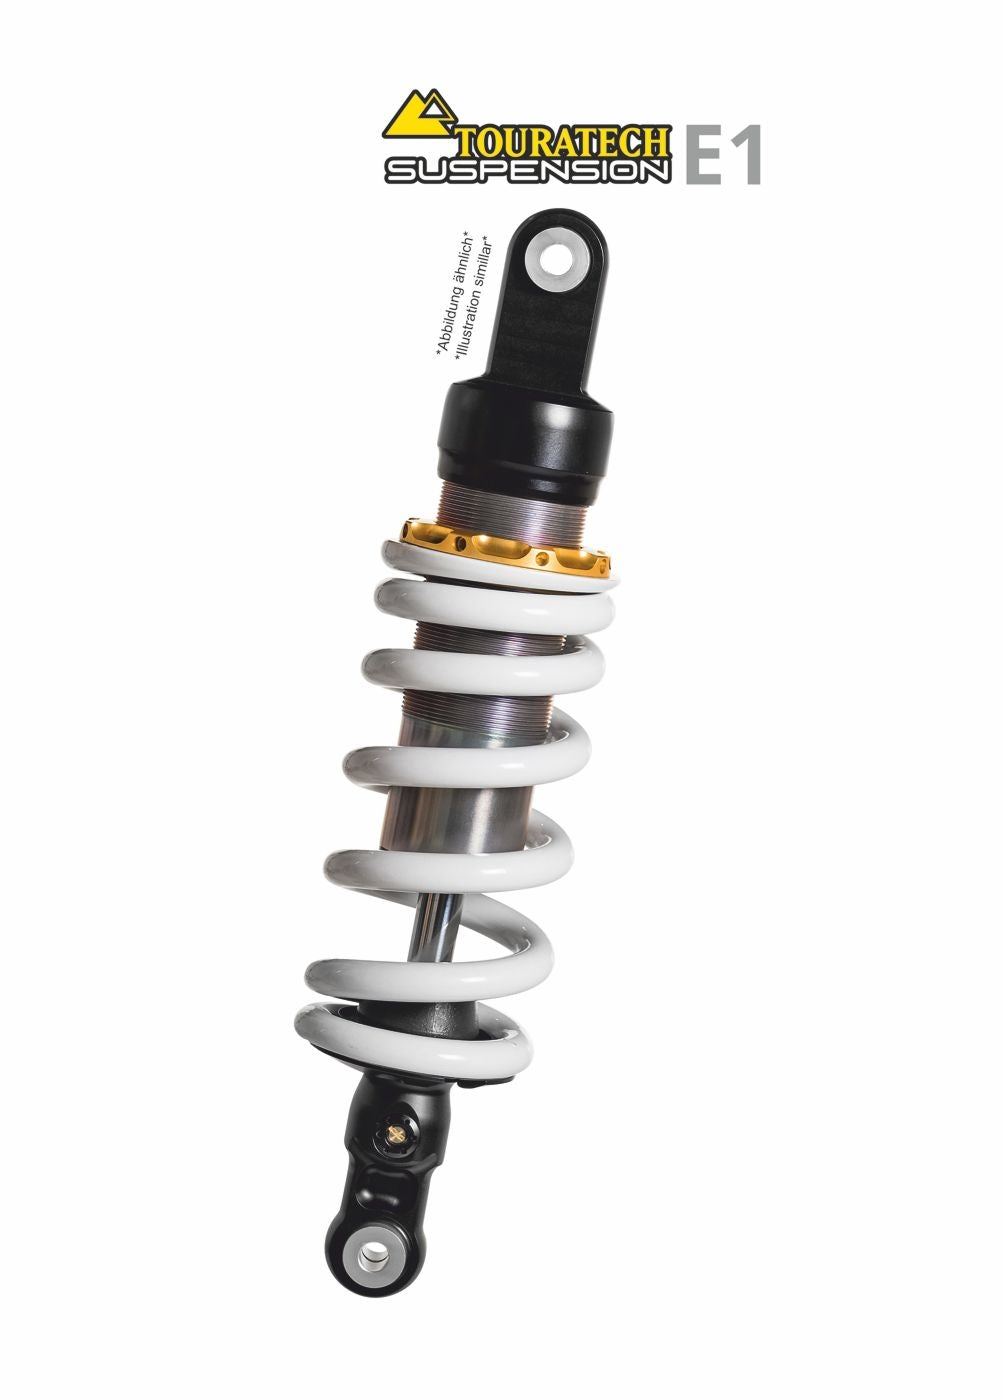 Touratech Suspension E1 shock absorber for BMW R 850 R, R 1100 R Rear 1995 - 2000